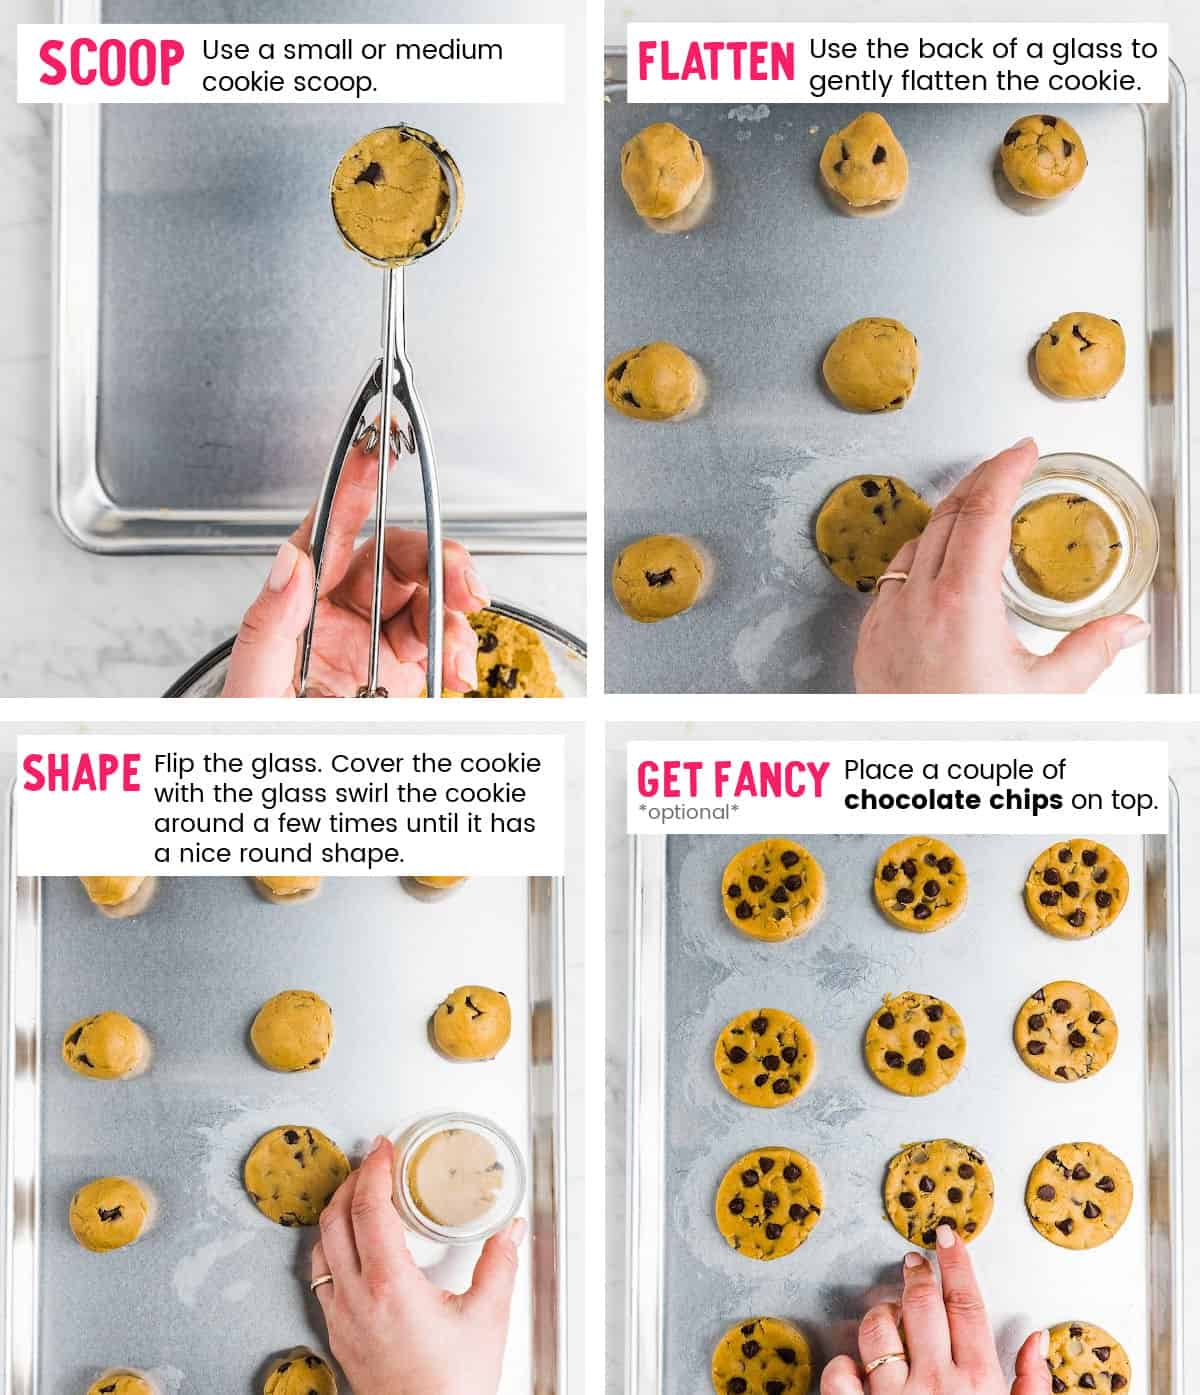 Collage of images showing how to prepare the cookies for baking.